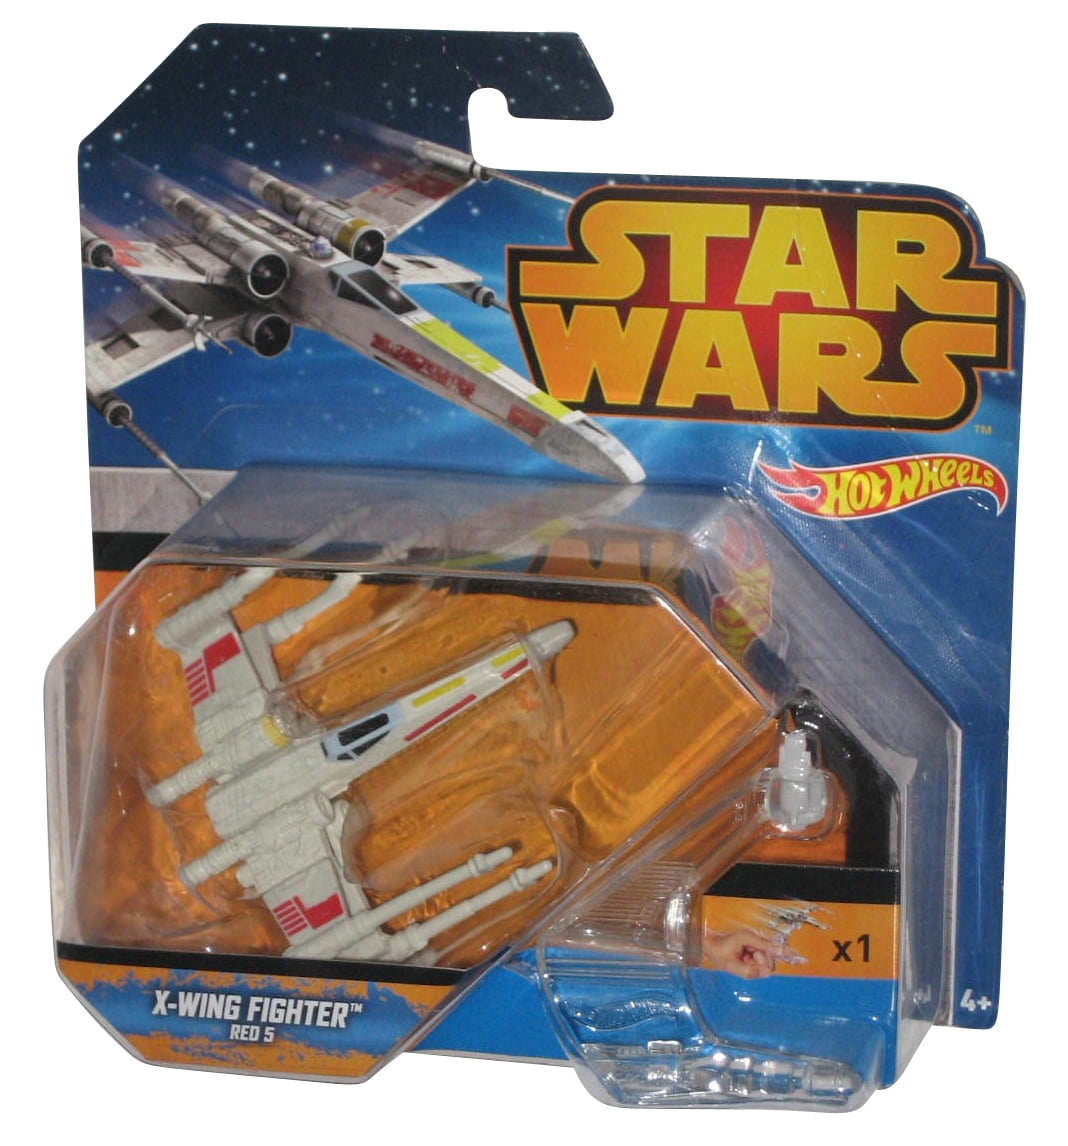 Star Wars Starships X WING FIGHTER RED 5 HOTWHEELS 1:64 Diecast Car